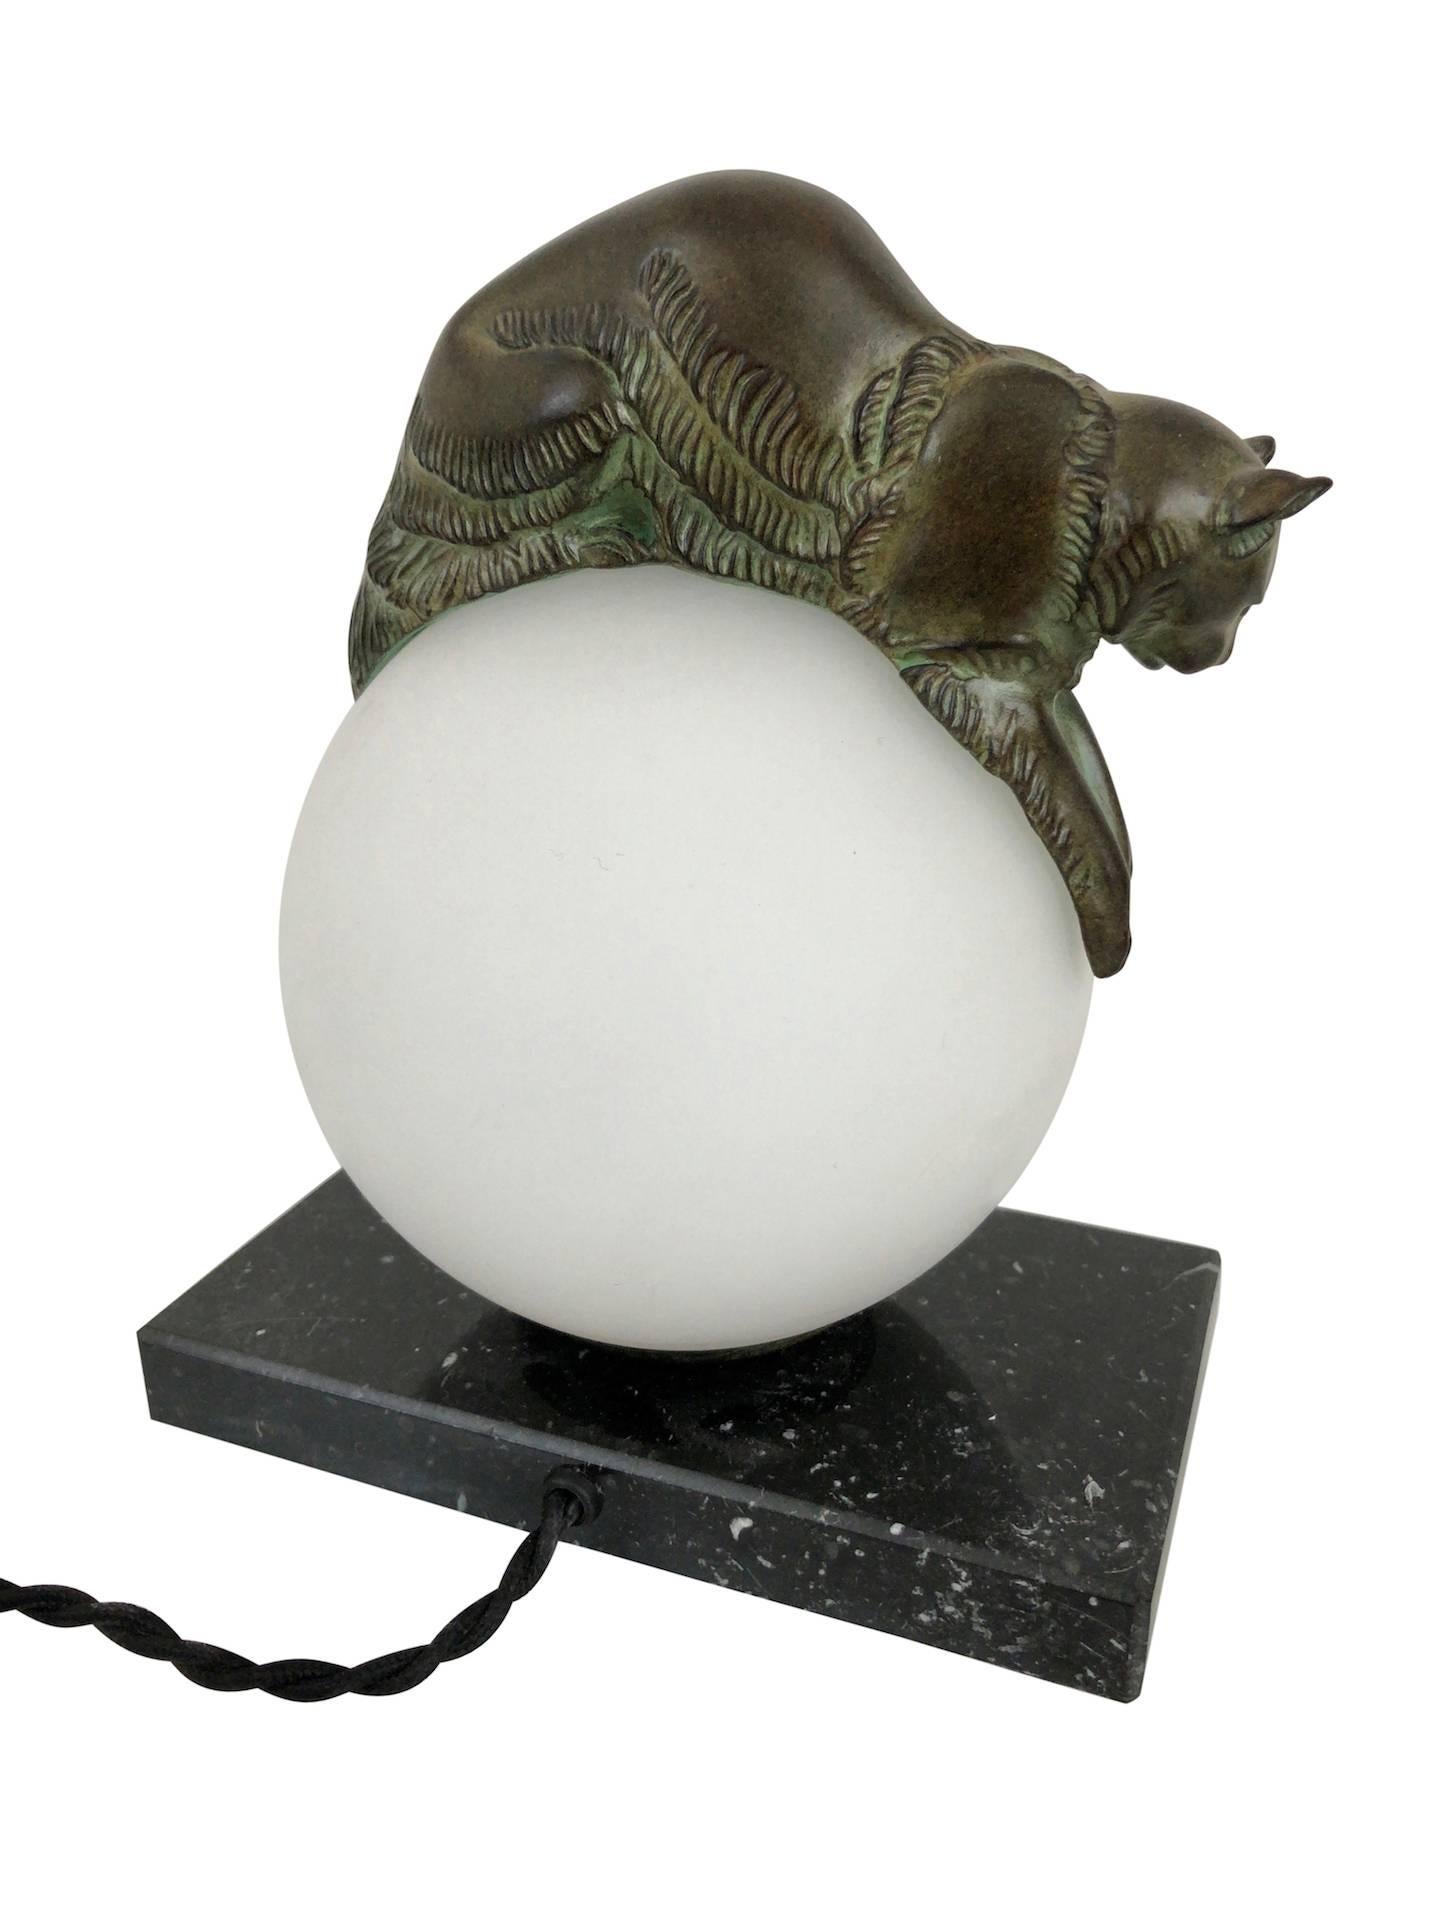 Contemporary Table Lamp, Equilibre, Cat on Glass Ball by Gaillard, Original Max Le Verrier